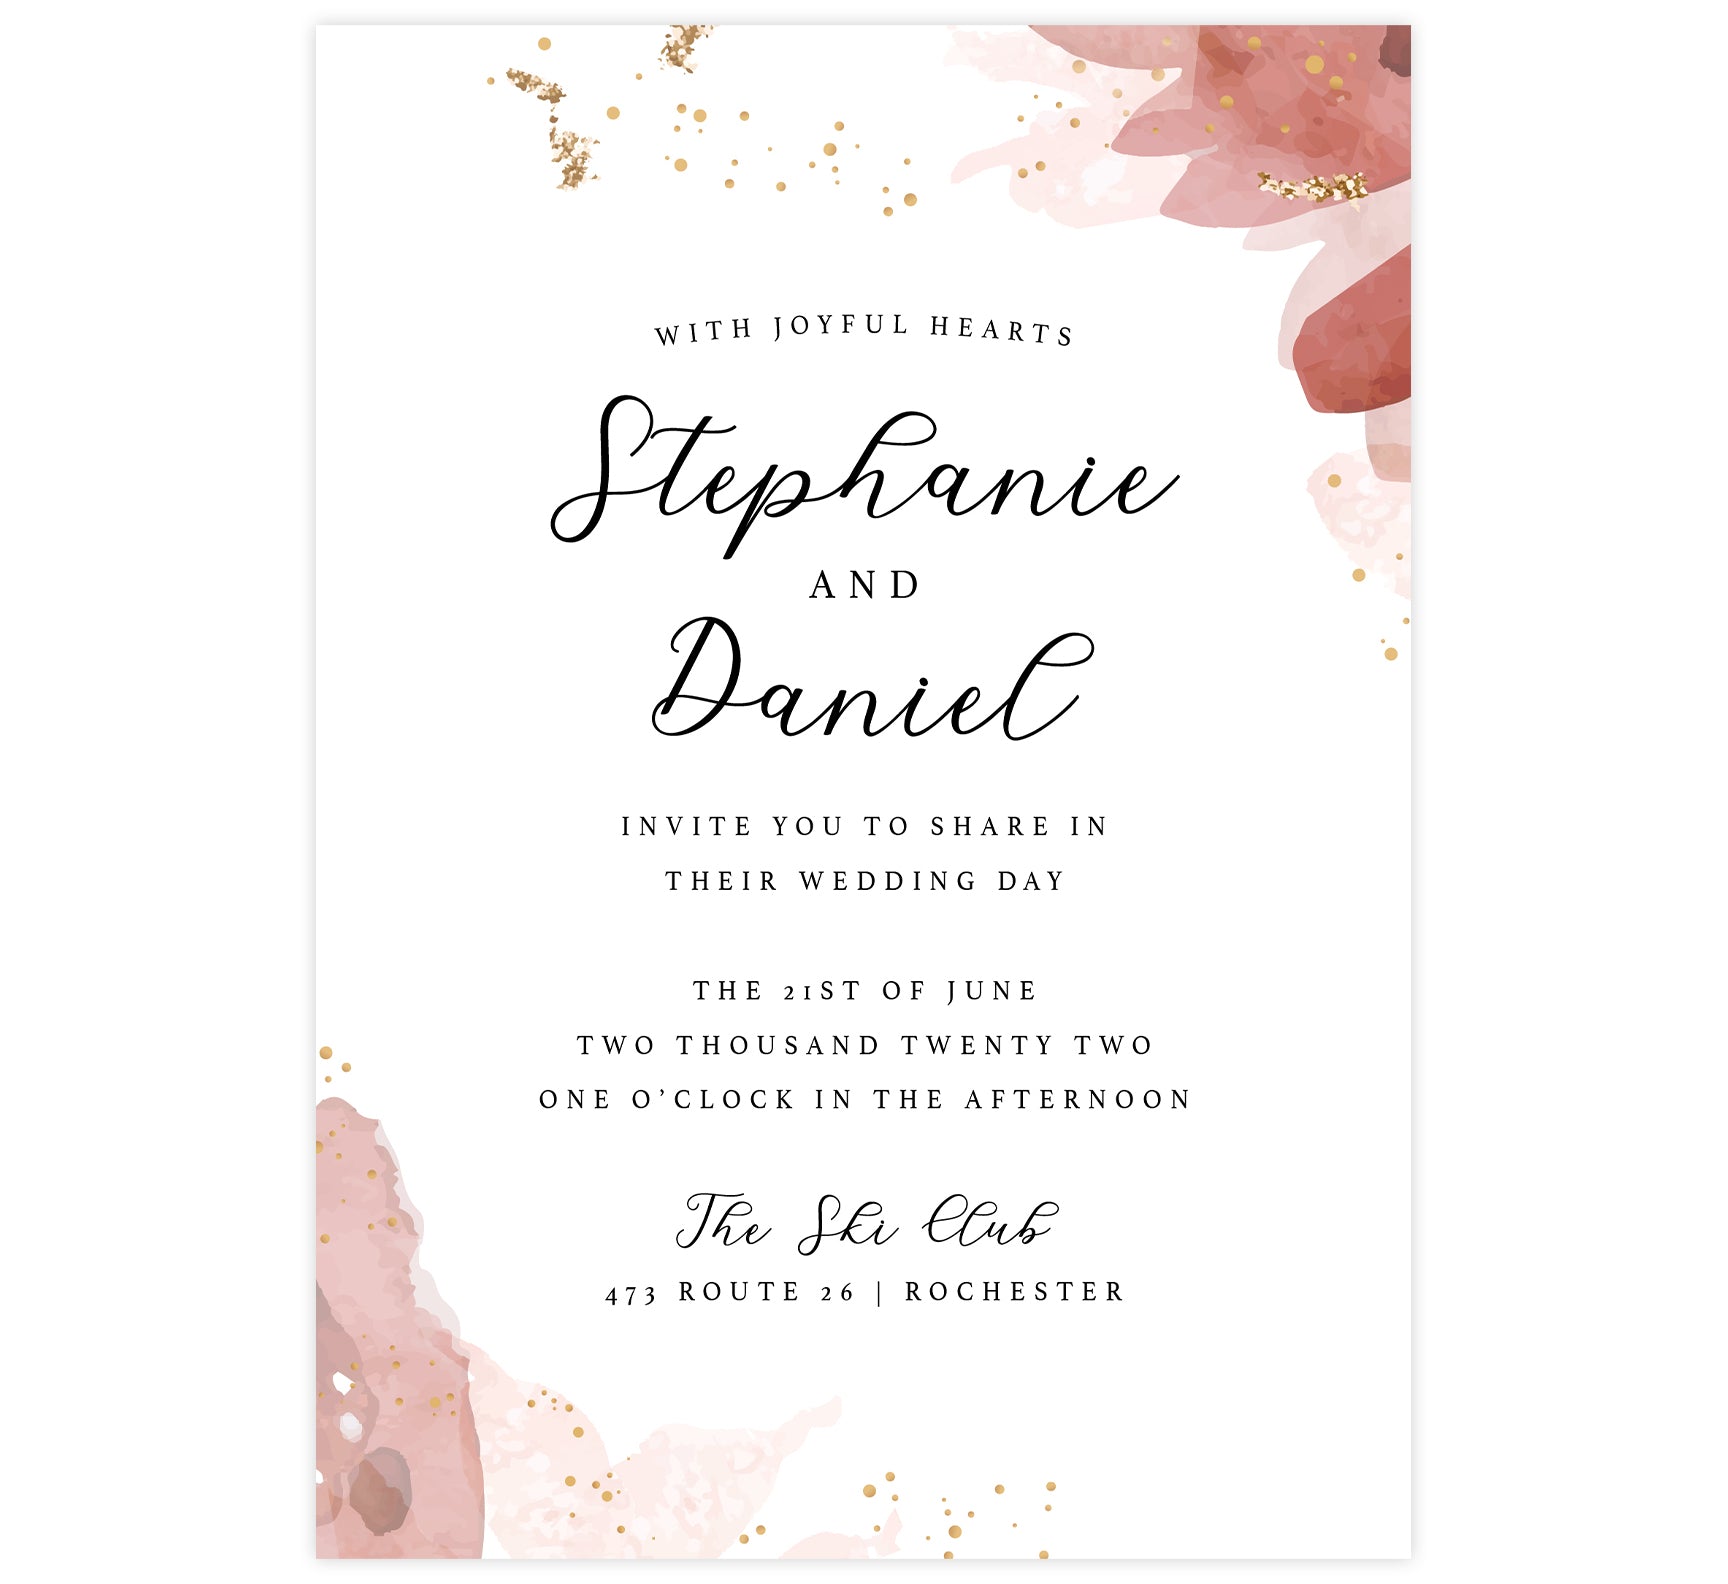 Enchanting Watercolor wedding invitation; white background with pink watercolor on the edges, small gold dots and glitter with black text